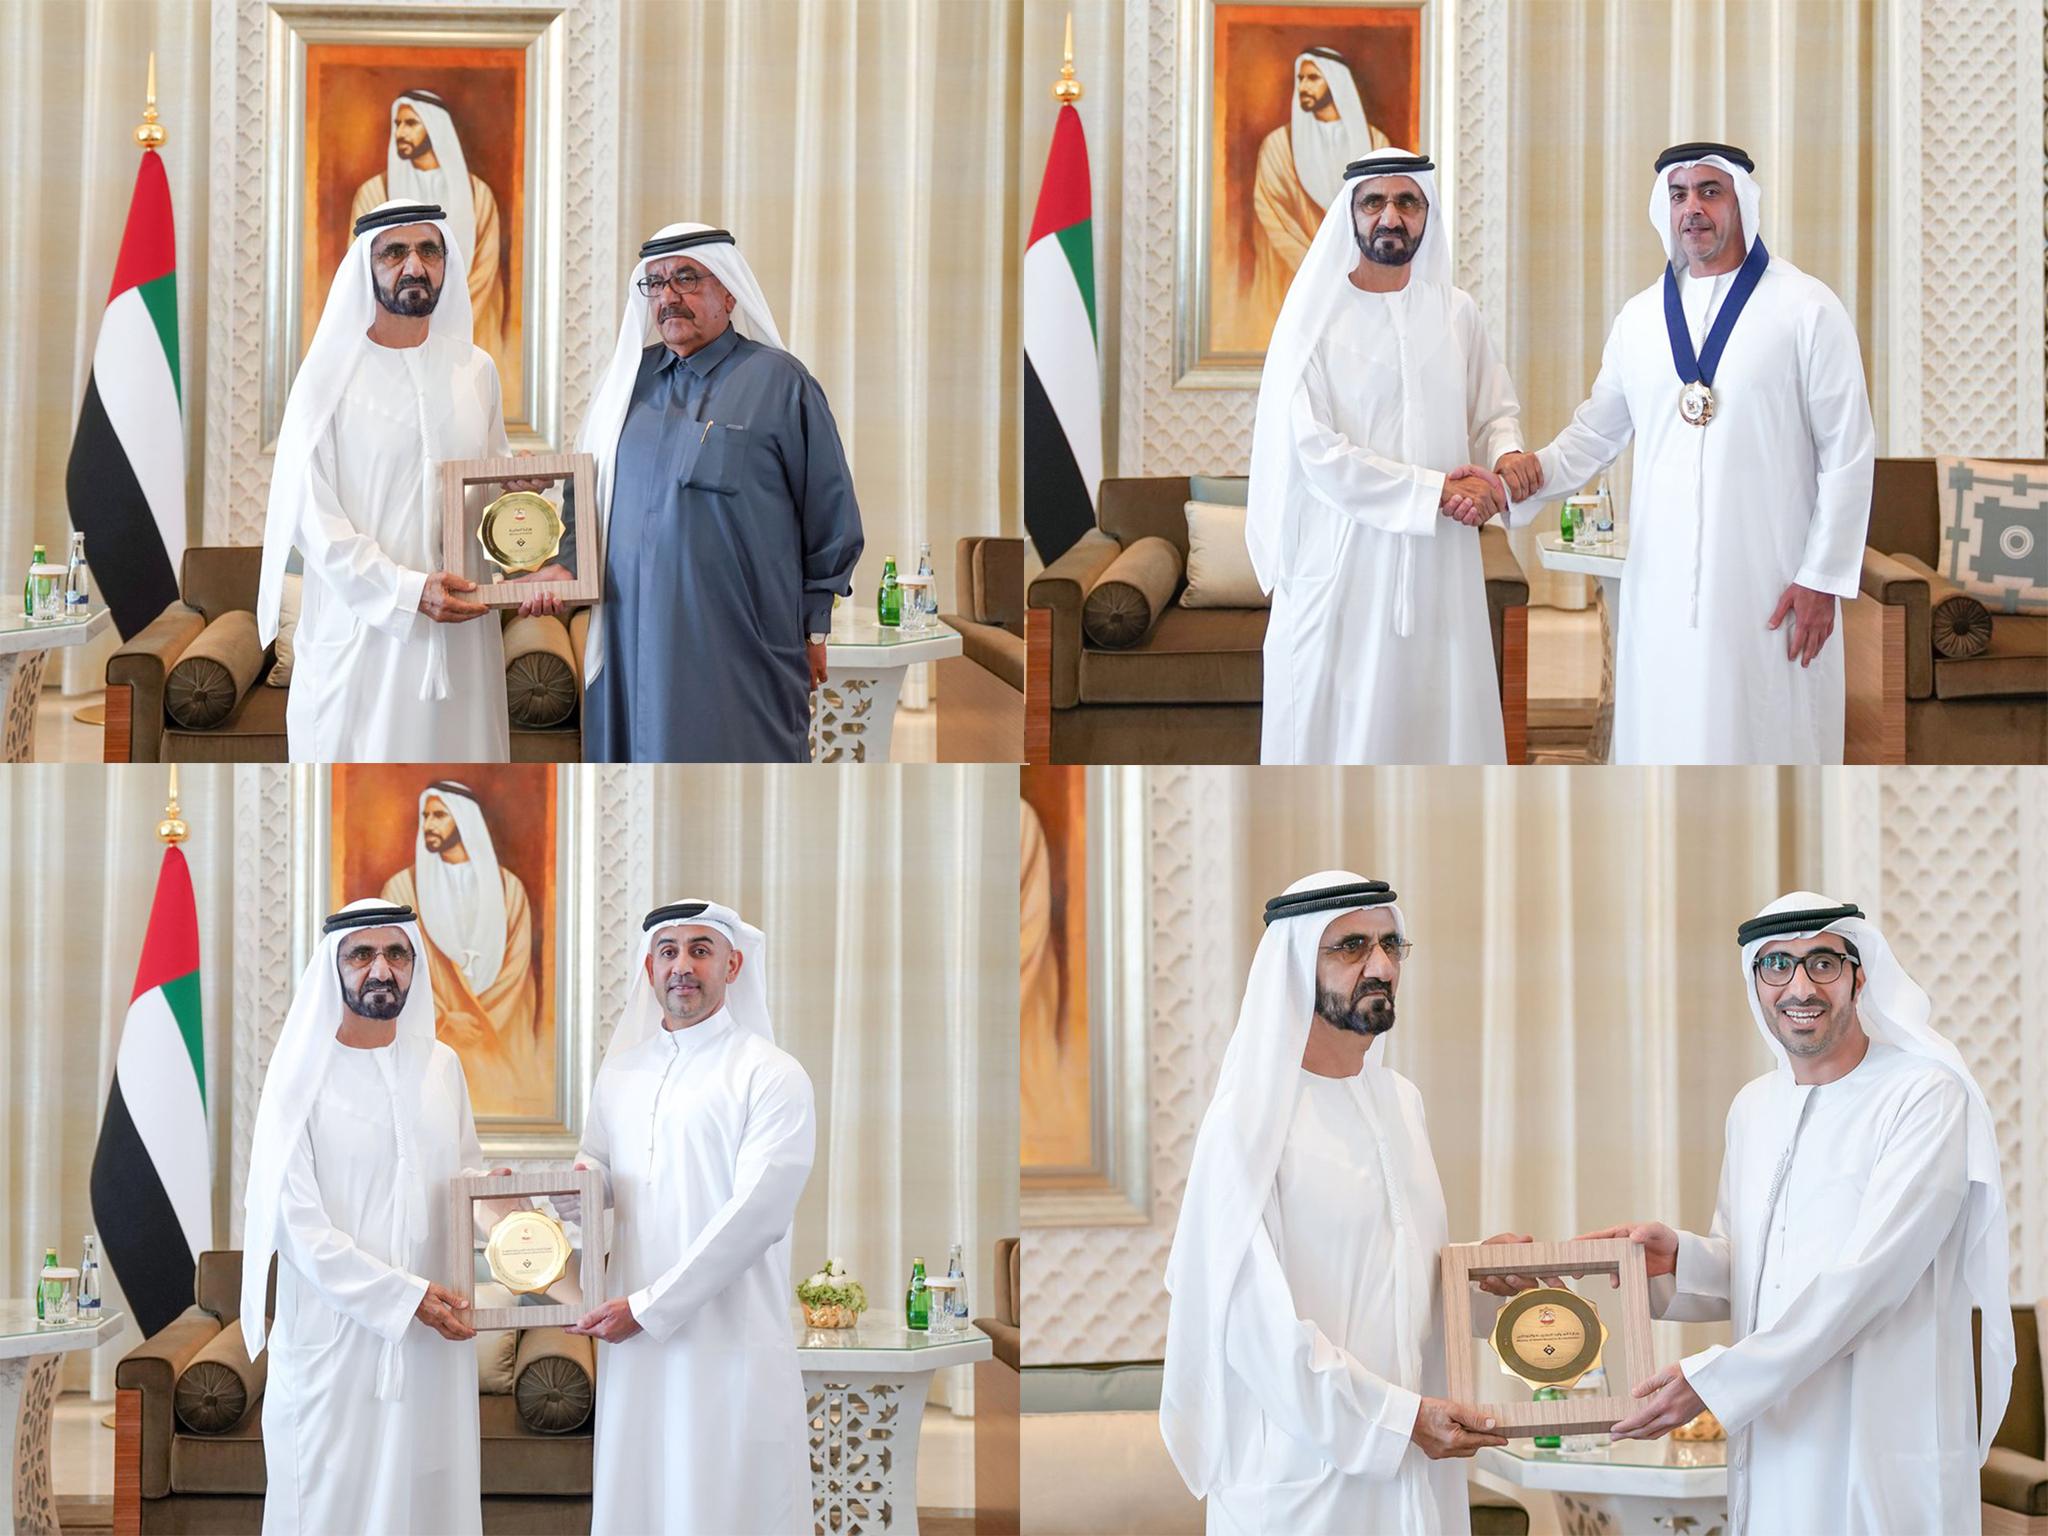 The government was mocked after pictures were posted of the vice-president of the United Arab Emirates handing out prizes to the winners of the Gender Balance Index 2018 